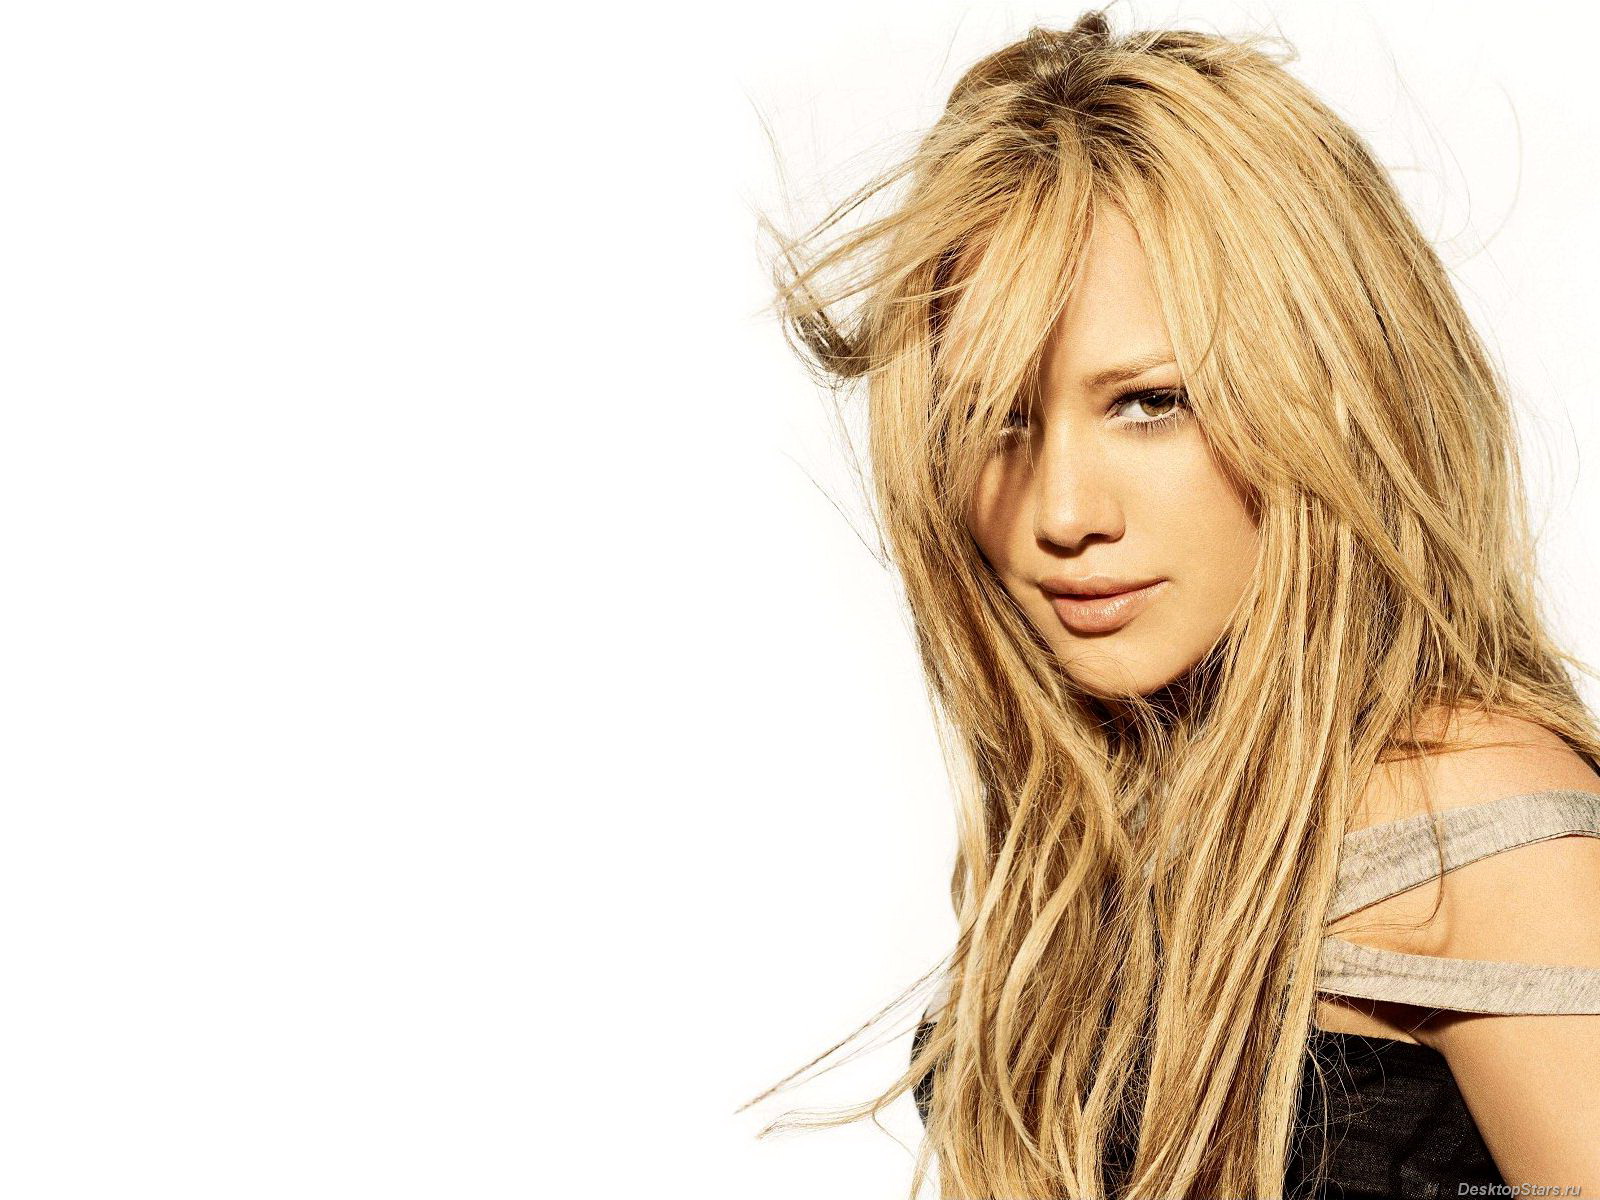 Free download Hilary wallpapers By Dave Hilary Duff Wallpaper 1280x1024  for your Desktop Mobile  Tablet  Explore 76 Hilary Duff Wallpaper   Hilary Swank Wallpaper Hilary Duff Wallpapers Hilary Swank Wallpapers